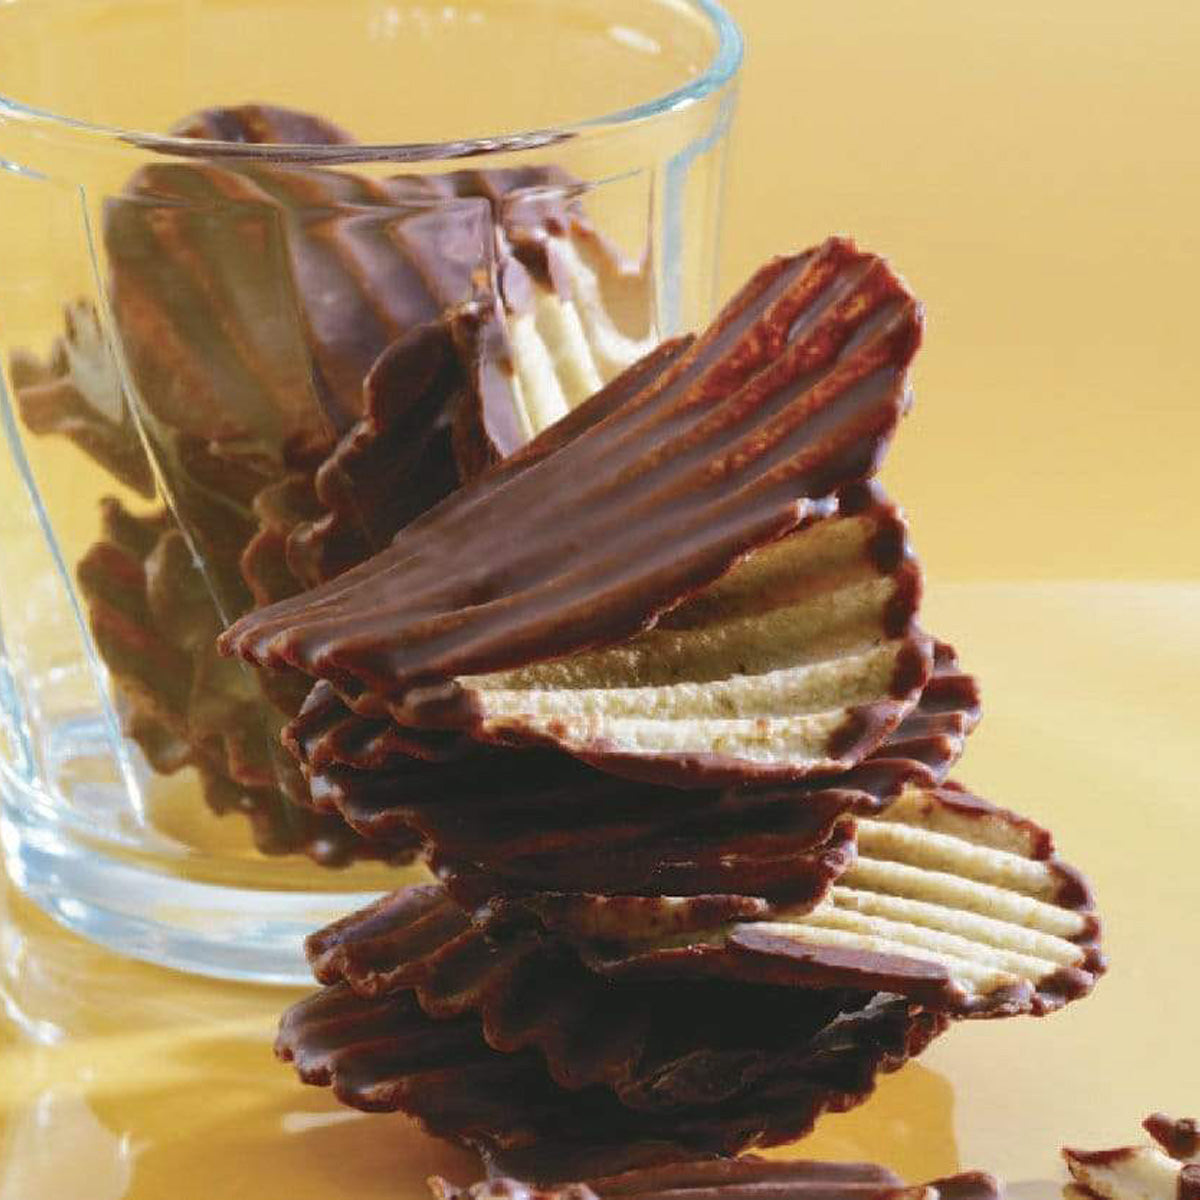 ROYCE' Chocolate - Potatochip Chocolate "Original" - Image shows brown chocolate-covered potato chips with a ridged texture, some on a yellow surface, others in a clear glass behind. Background is in color yellow.